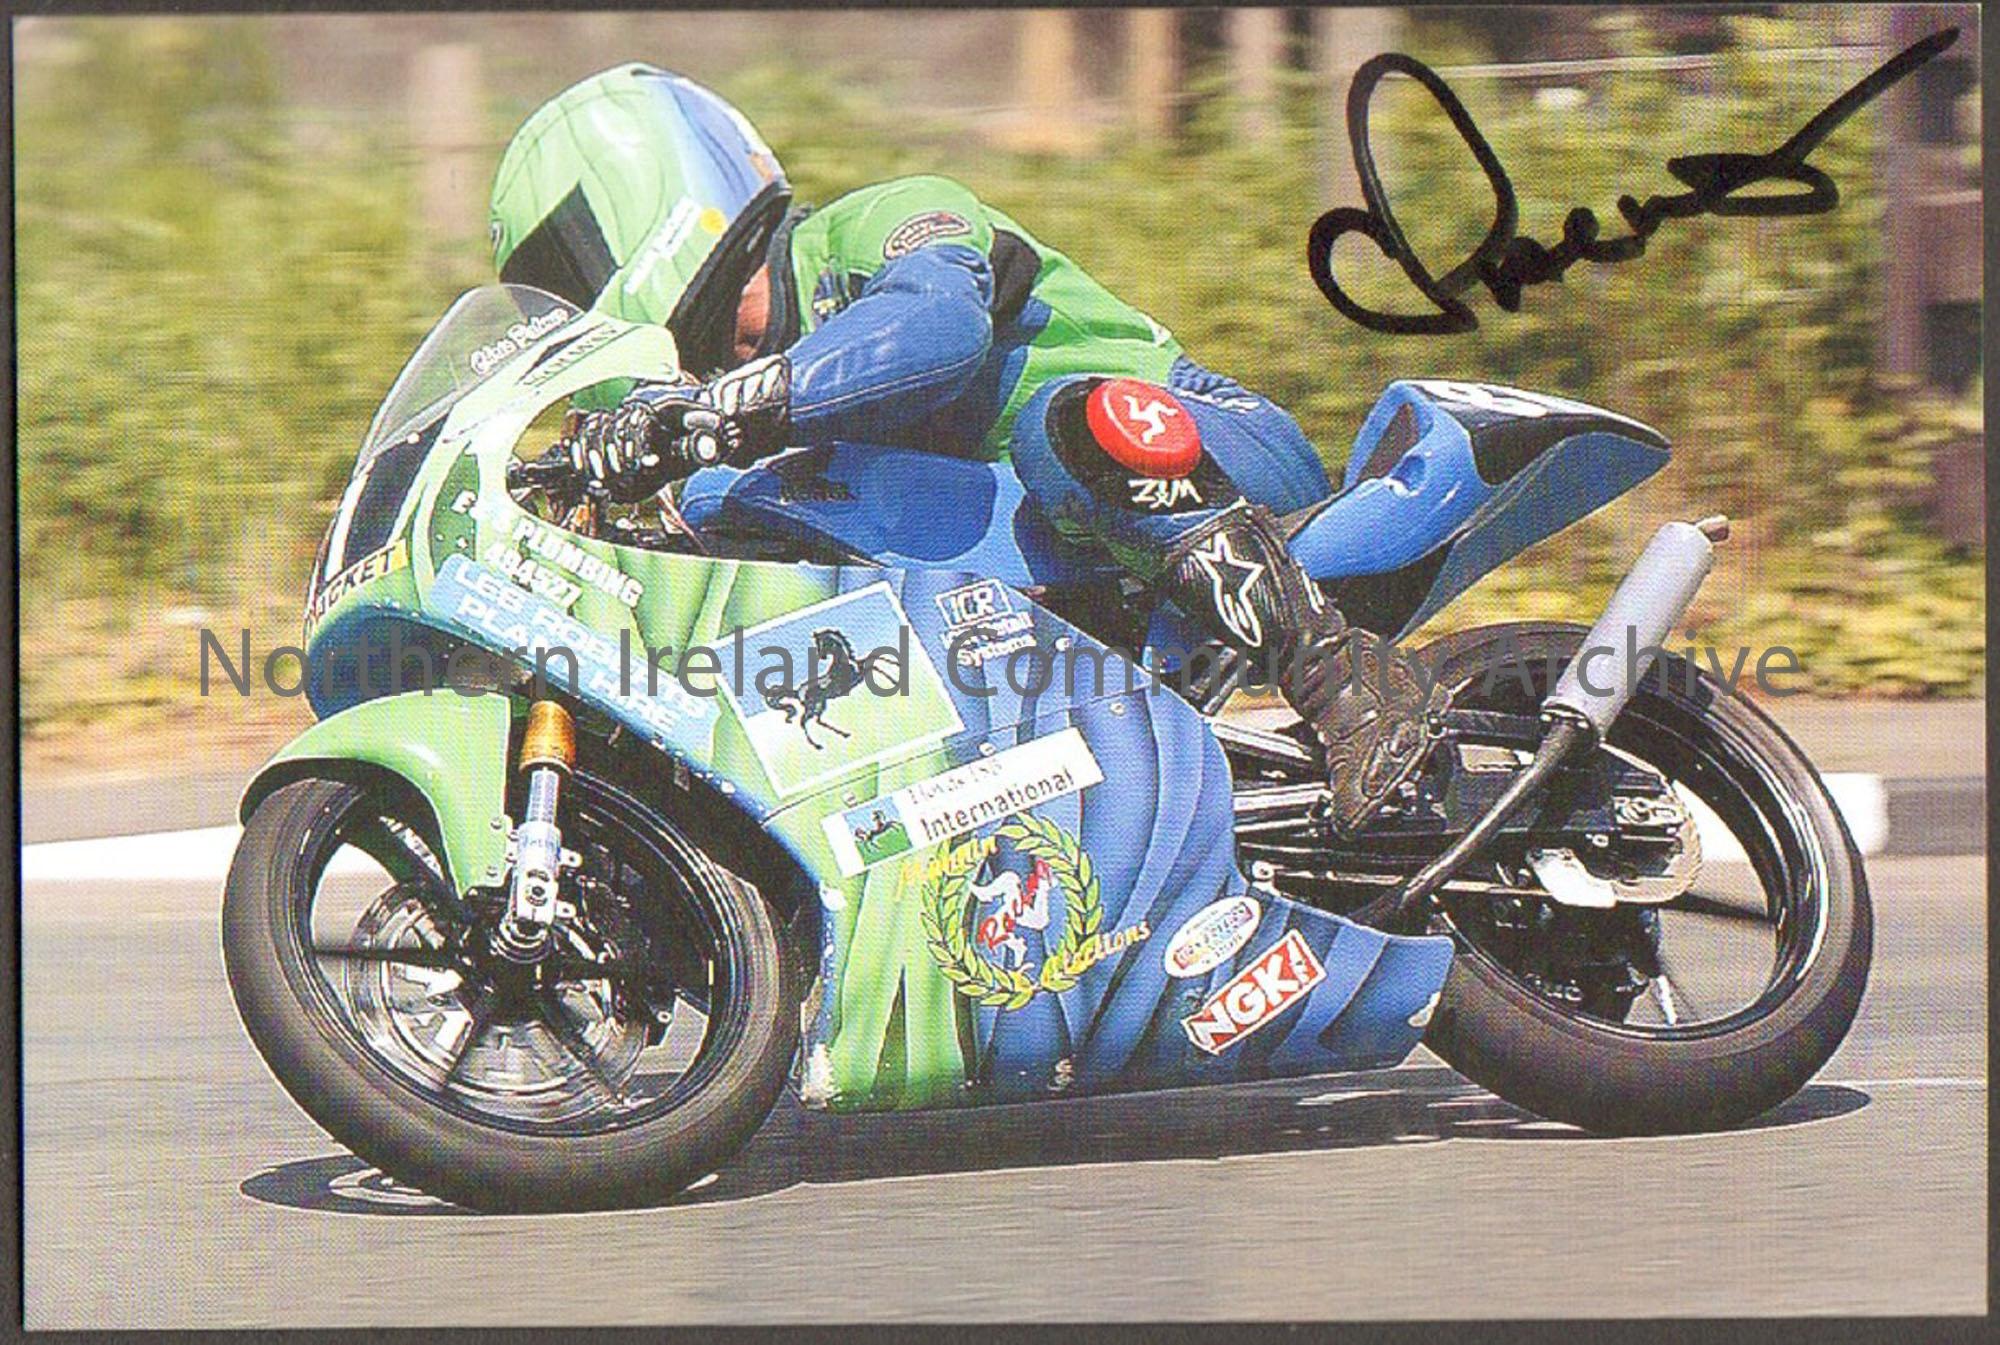 Signed photograph of Chris Palmer riding a green and blue motorbike wearing blue and green leathers in front of a hedge.